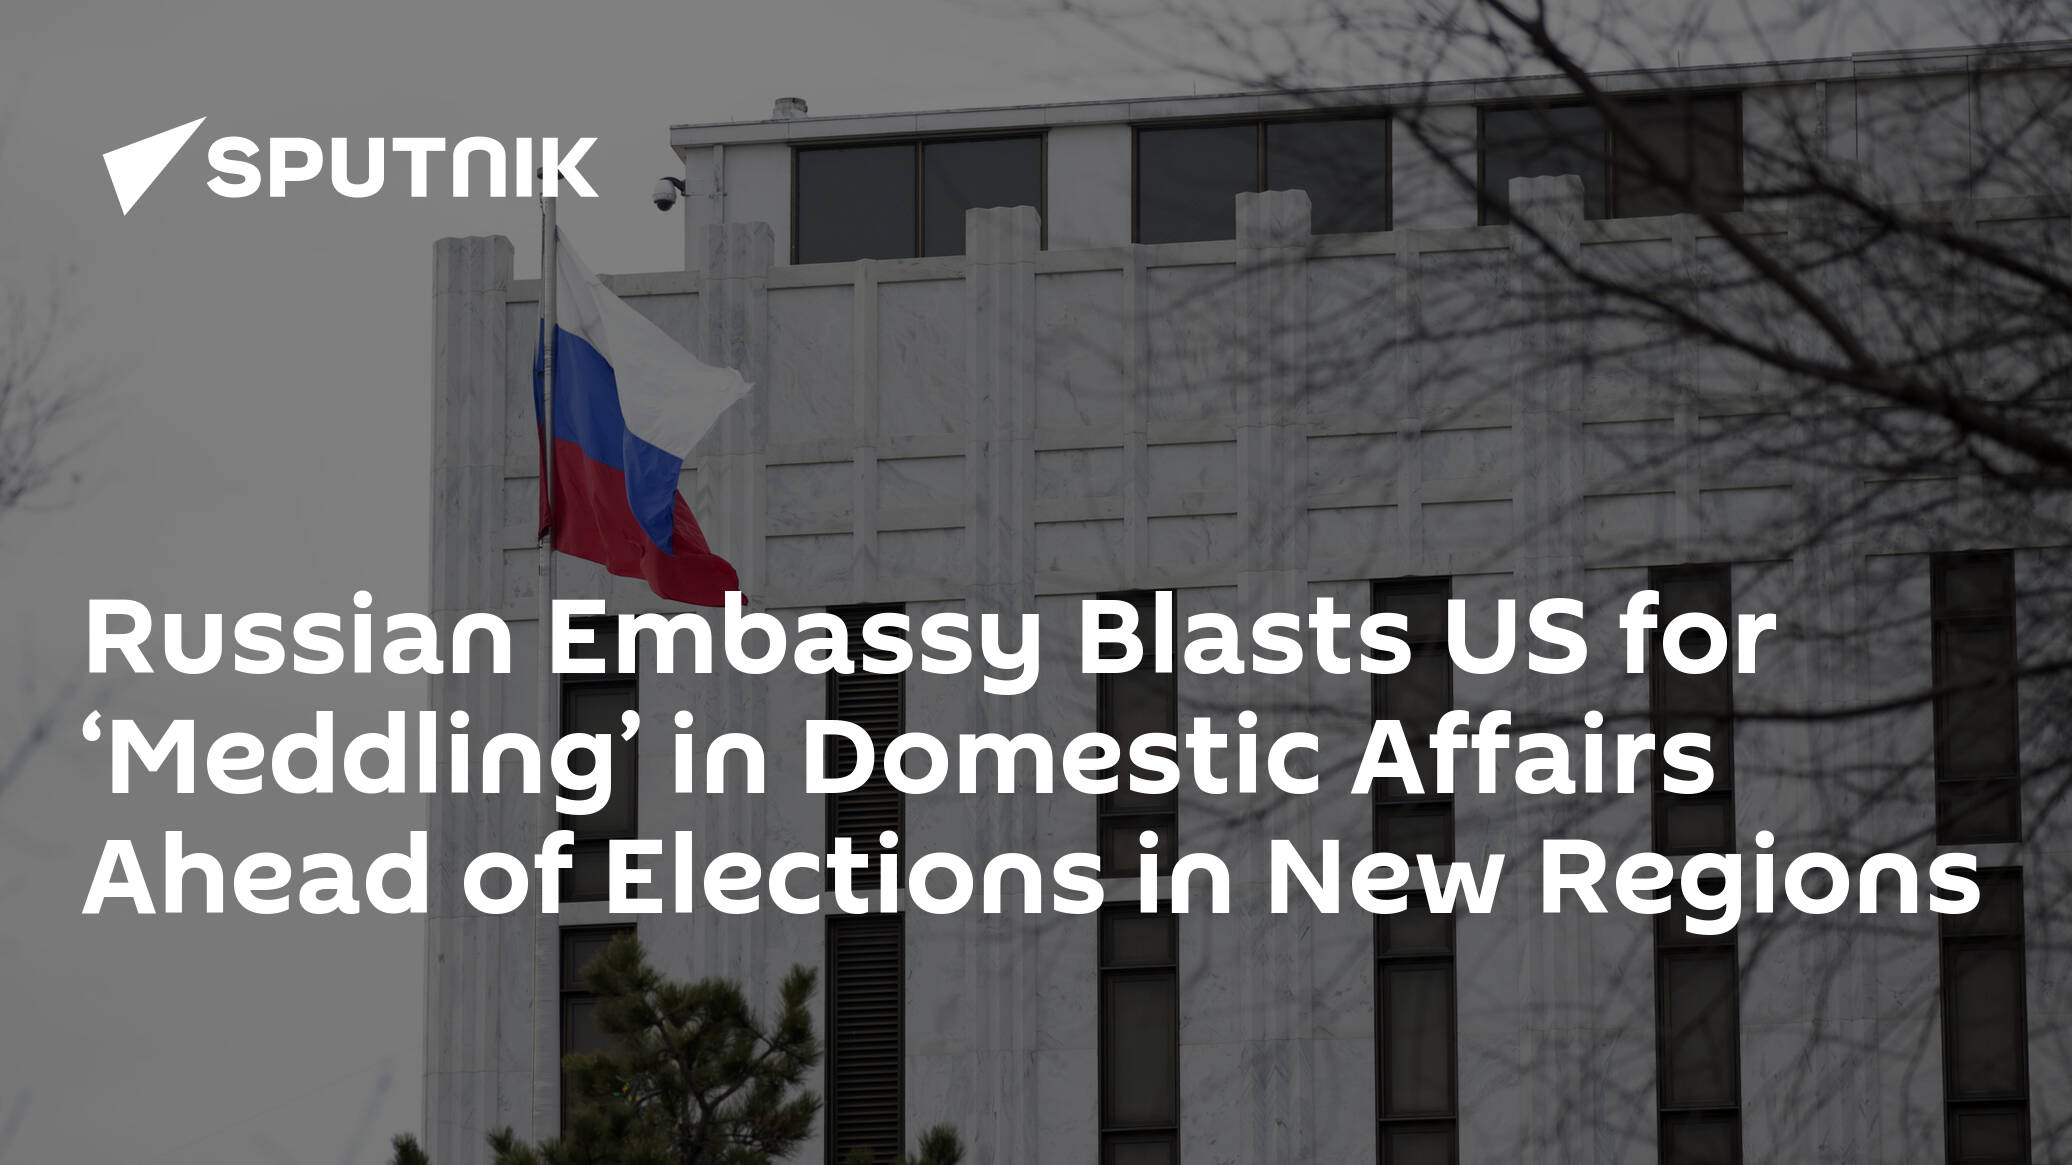 Russian Embassy Blasts US for ‘Meddling’ in Domestic Affairs Ahead of Elections in New Regions